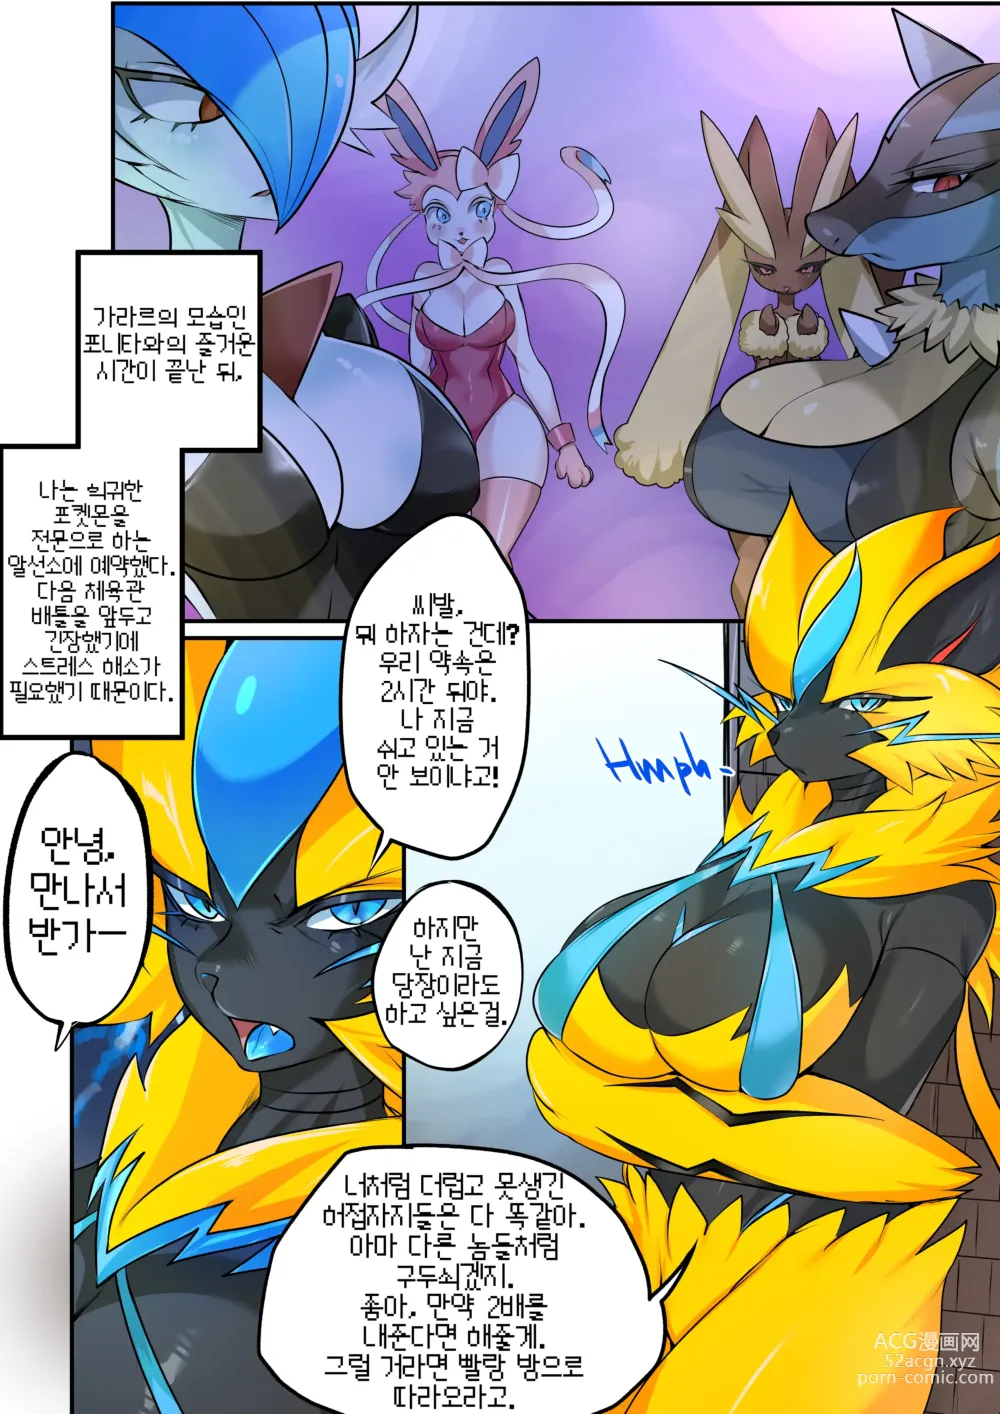 Page 5 of doujinshi POQEMON THUNDERCLAPPED